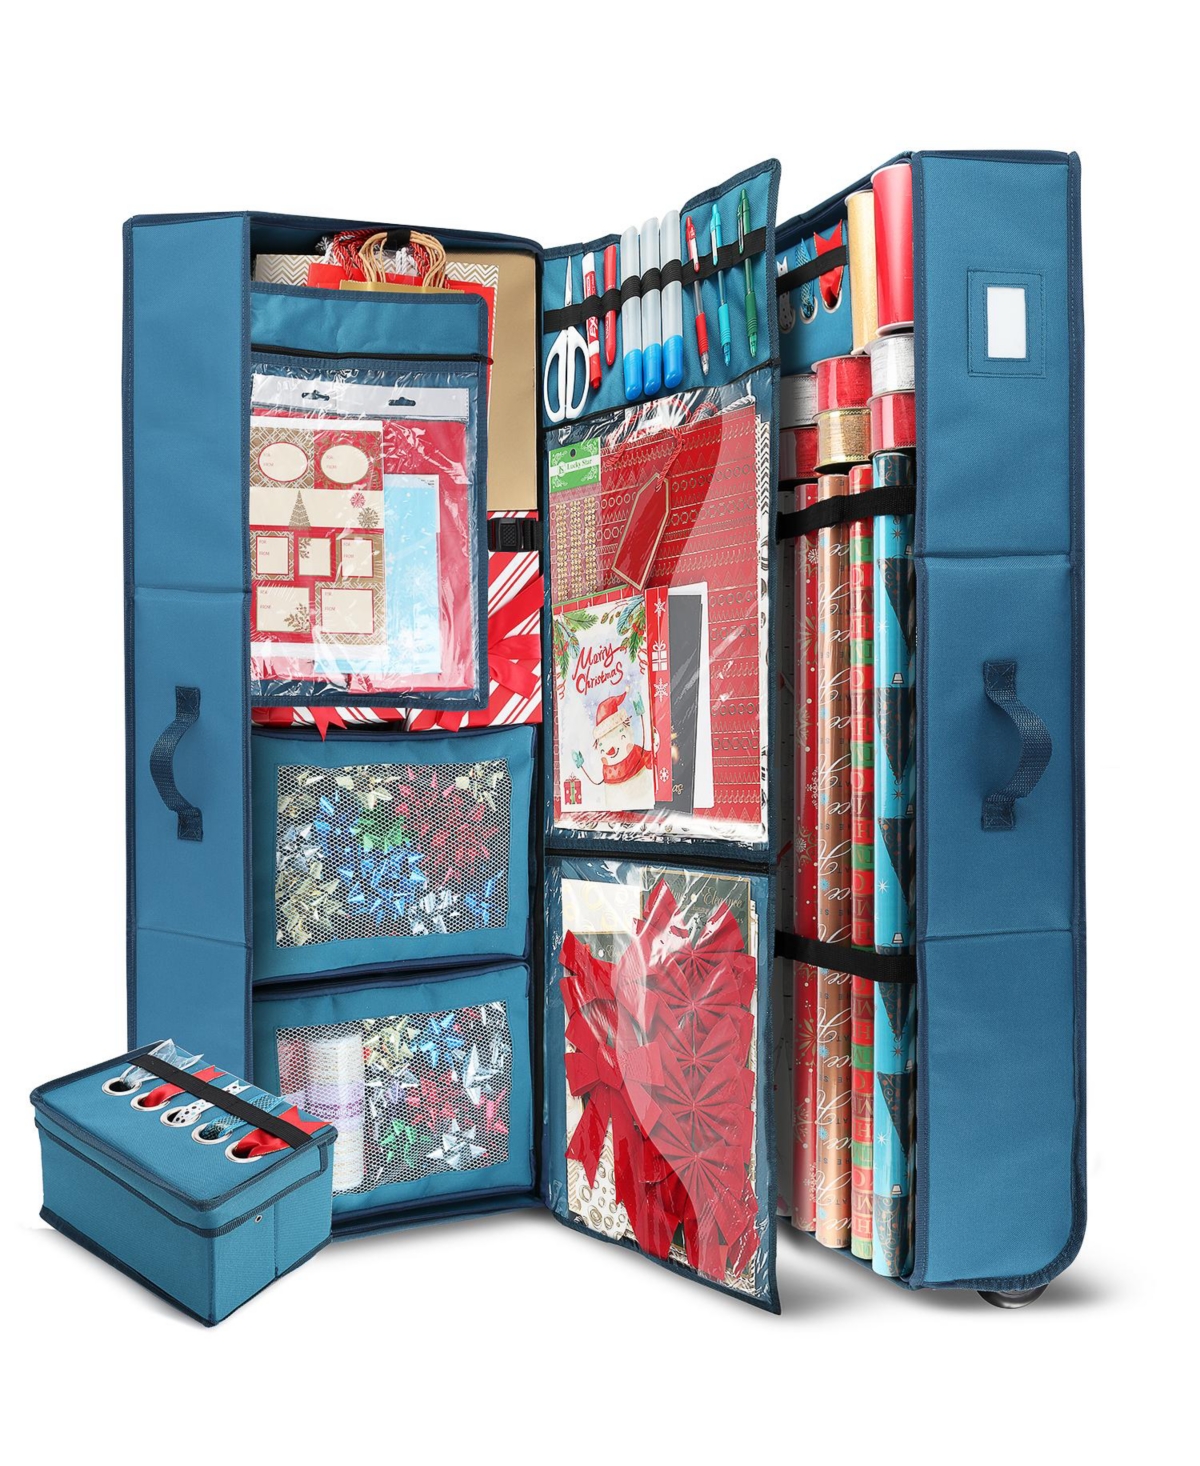 Premium Holiday Gift Wrapping Paper & Accessories Storage Organizer Box - X-Large with Wheels & 2 removable Storage Bins - Blue